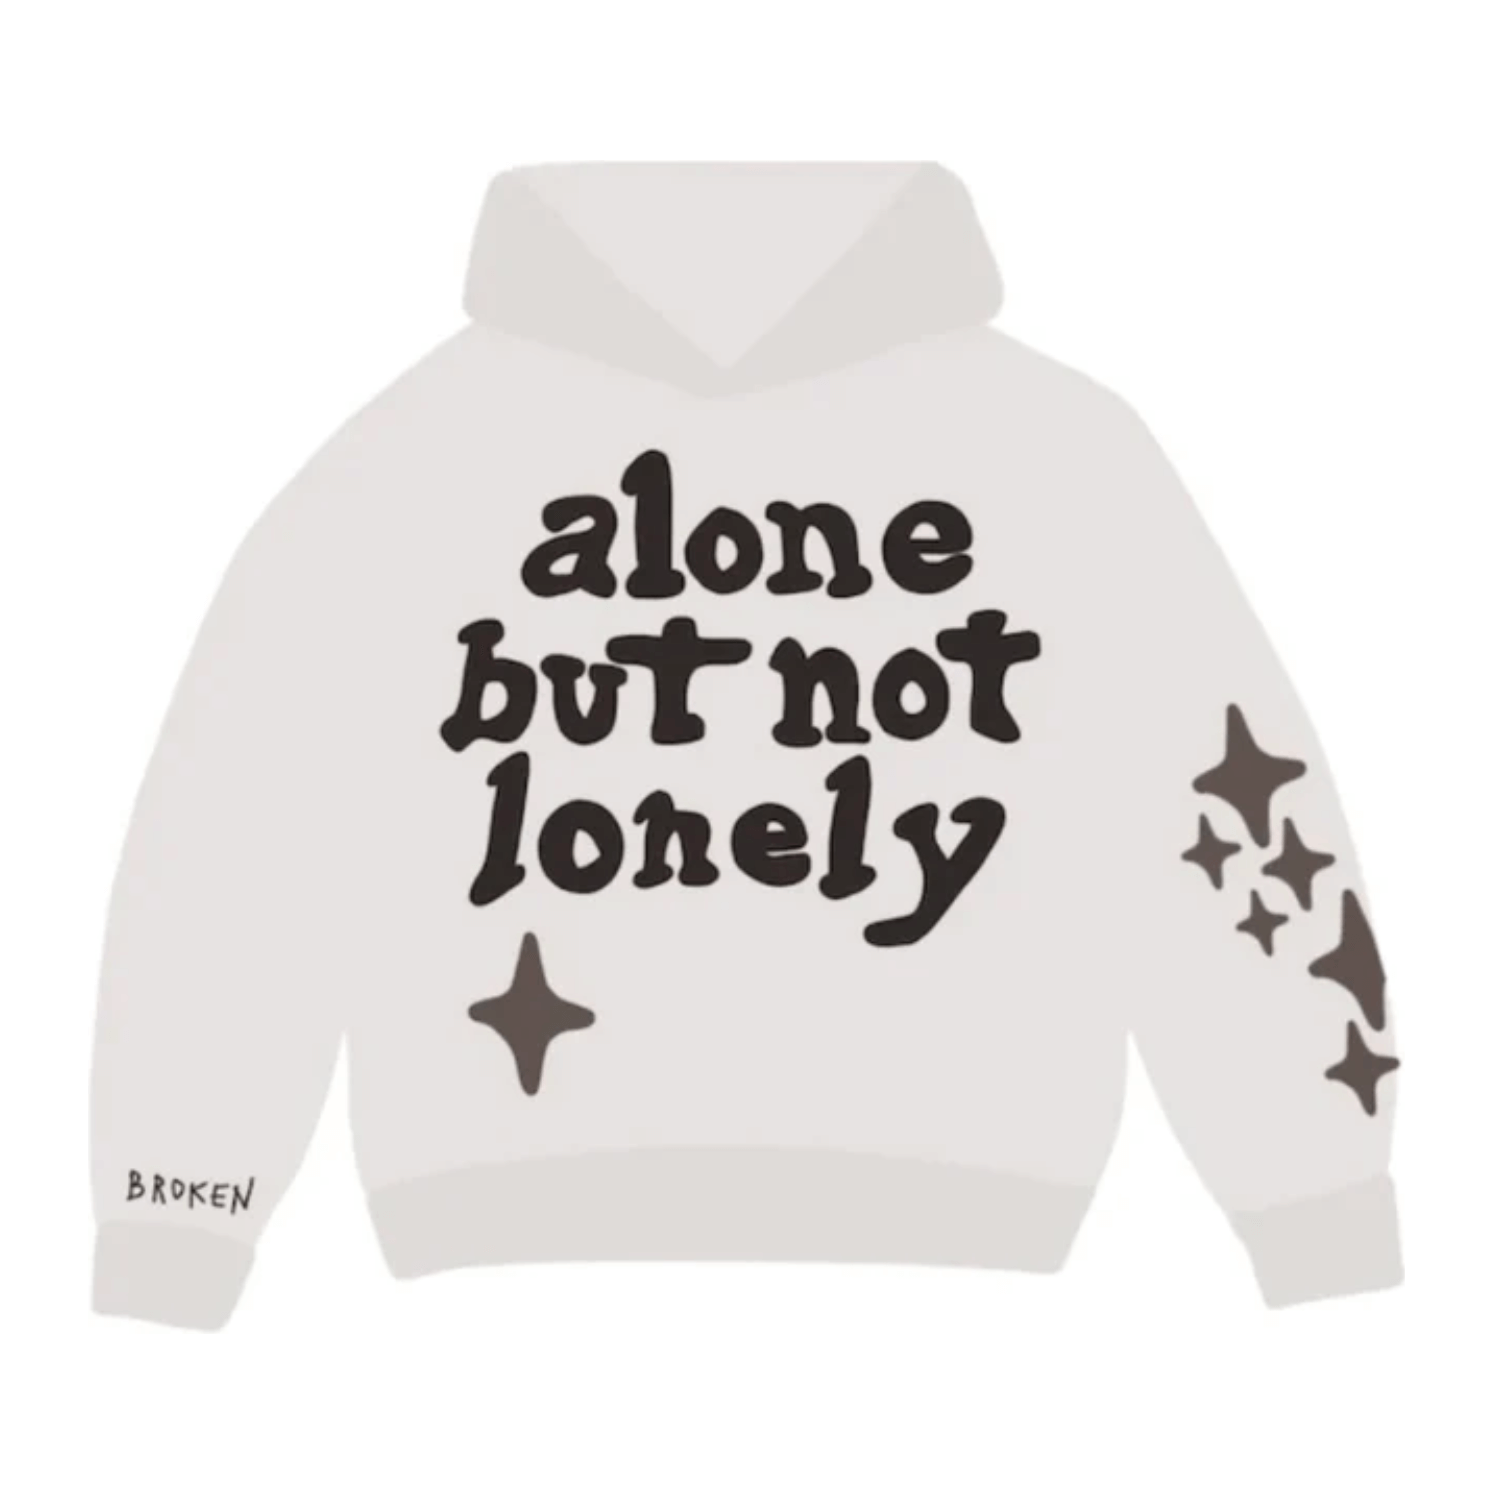 Broken Planet Market Alone But Not Lonely Hoodie White from Broken Planet Market